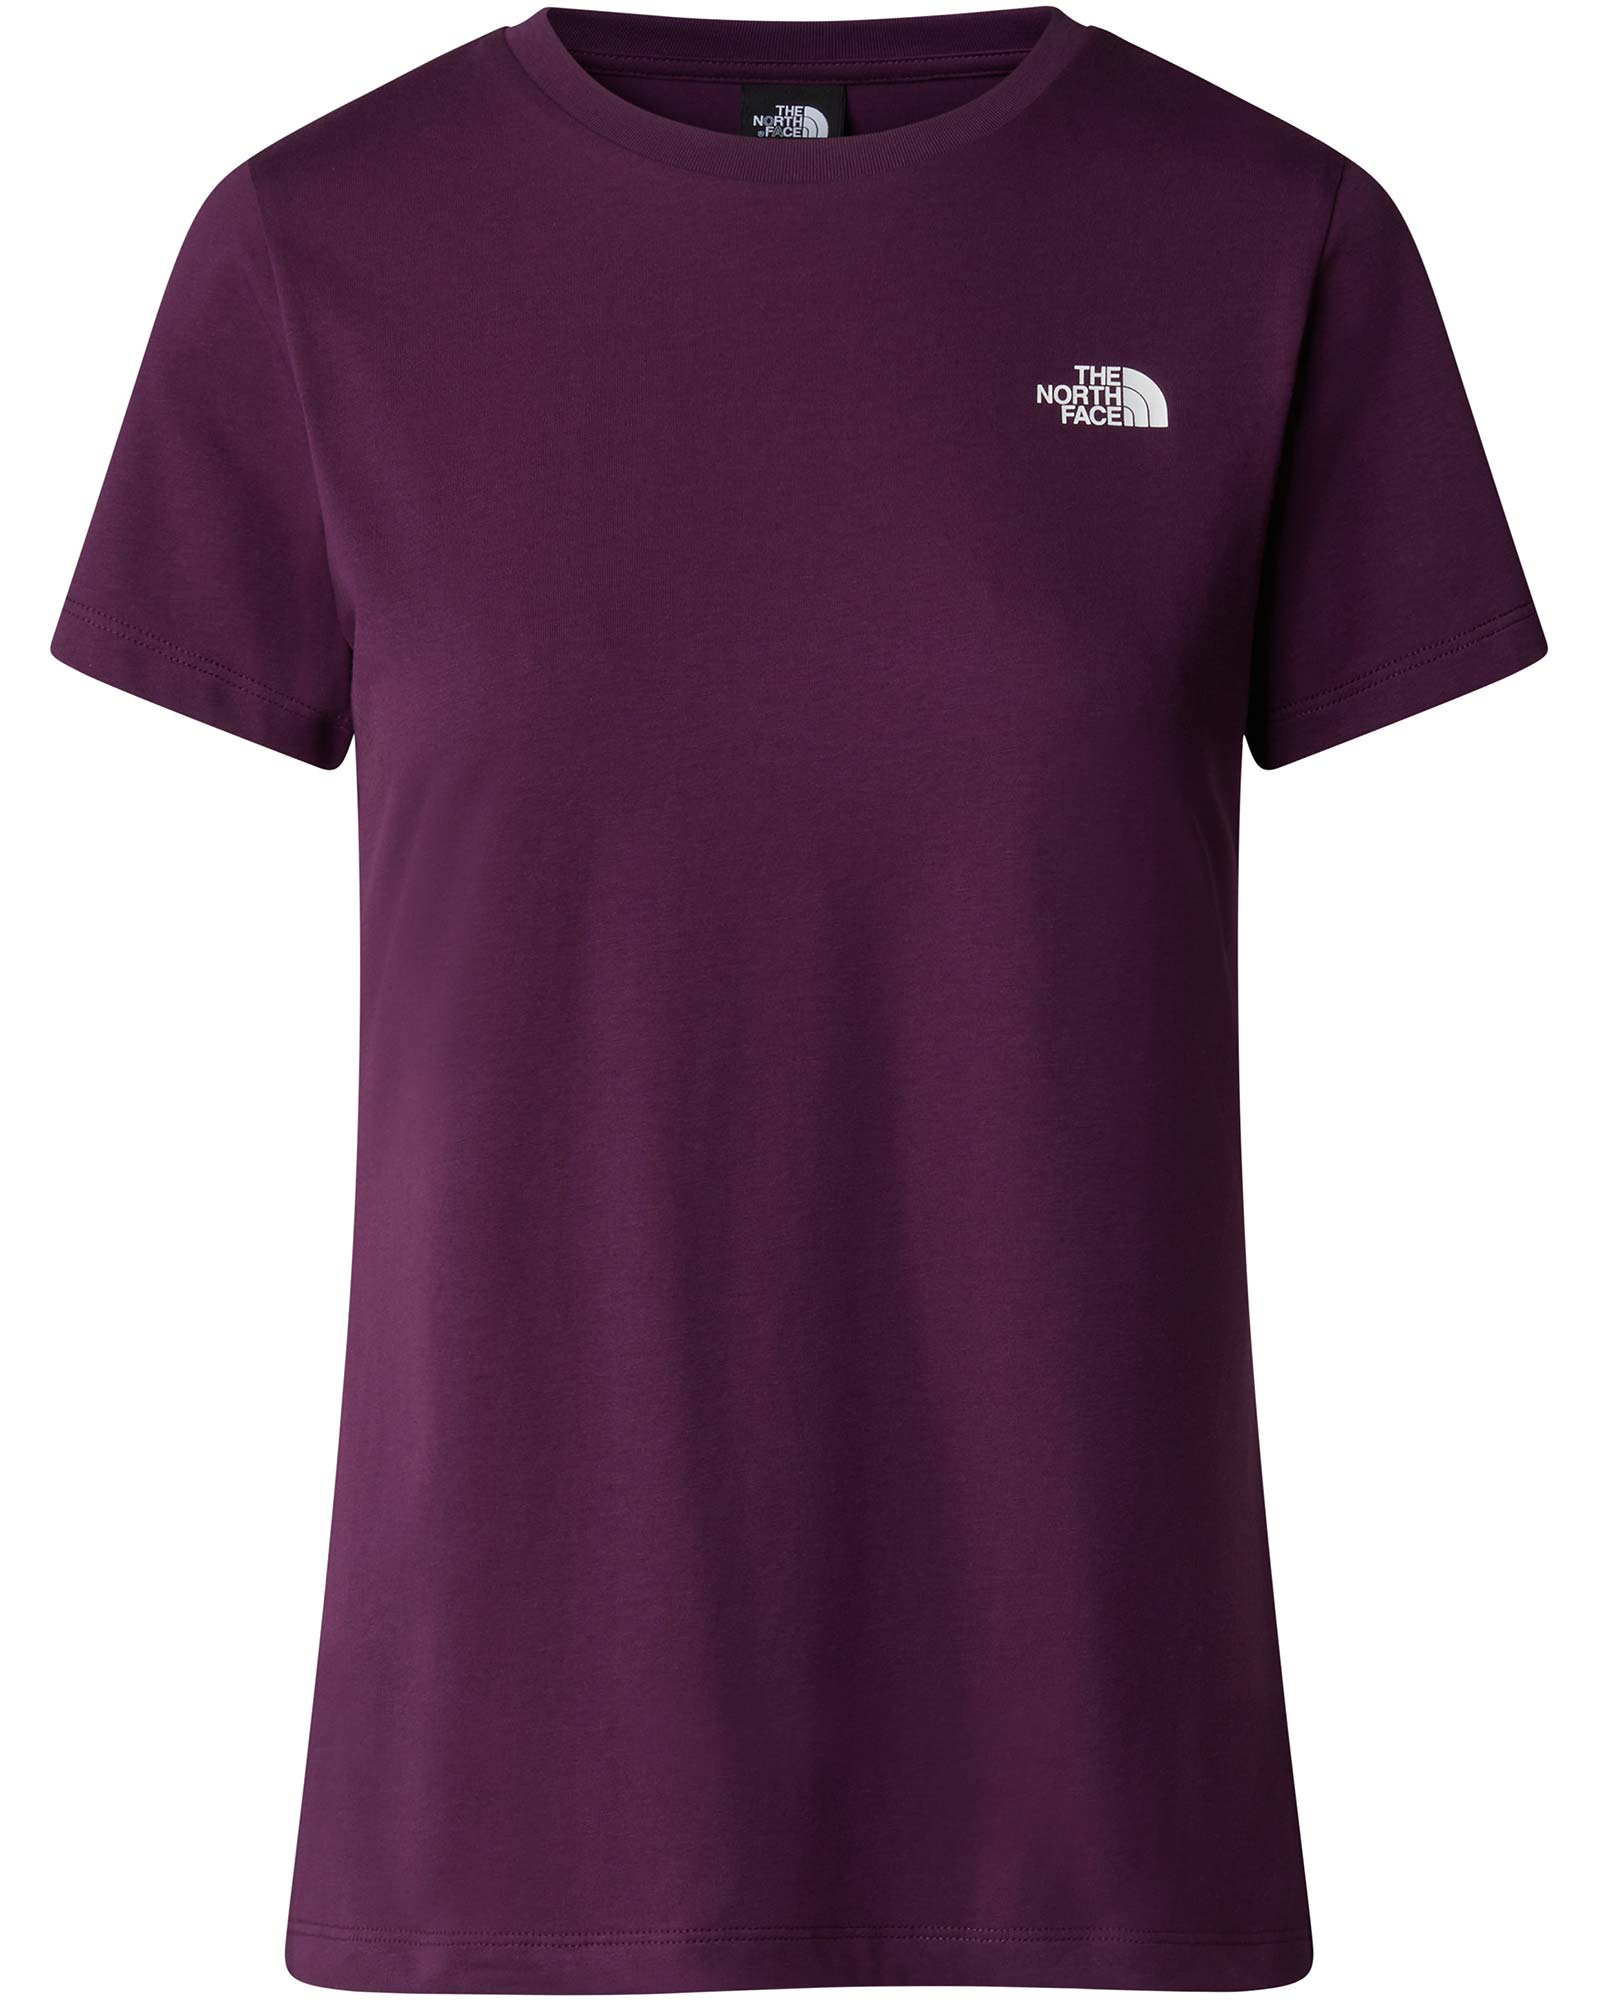 The North Face Women's Simple Dome T-Shirt